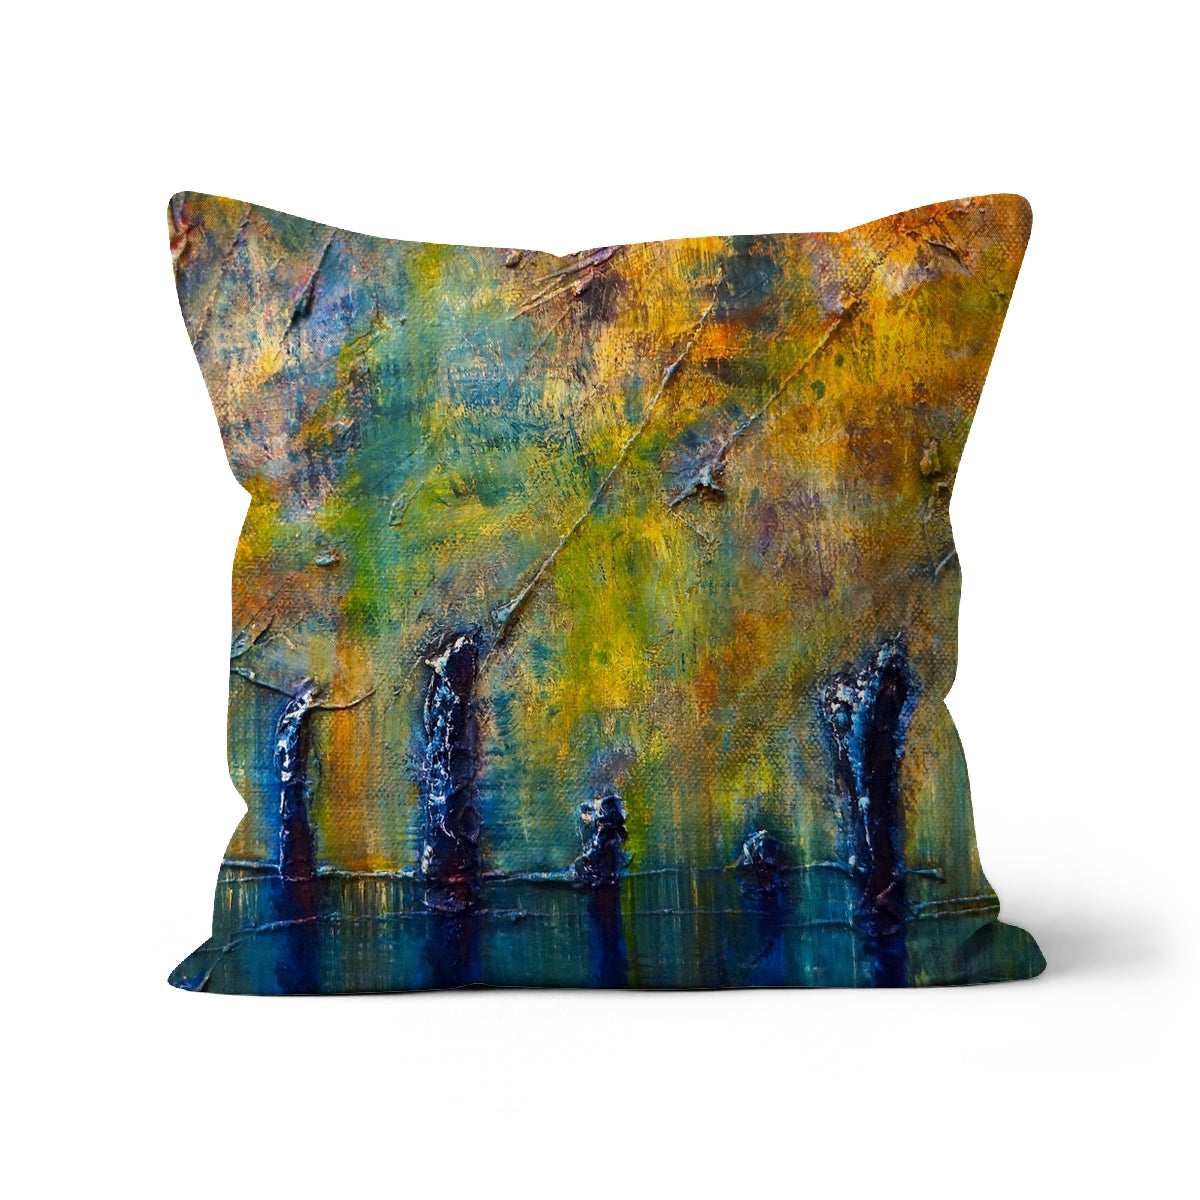 Stenness Moonlight Orkney Art Gifts Cushion-Cushions-Orkney Art Gallery-Linen-22"x22"-Paintings, Prints, Homeware, Art Gifts From Scotland By Scottish Artist Kevin Hunter